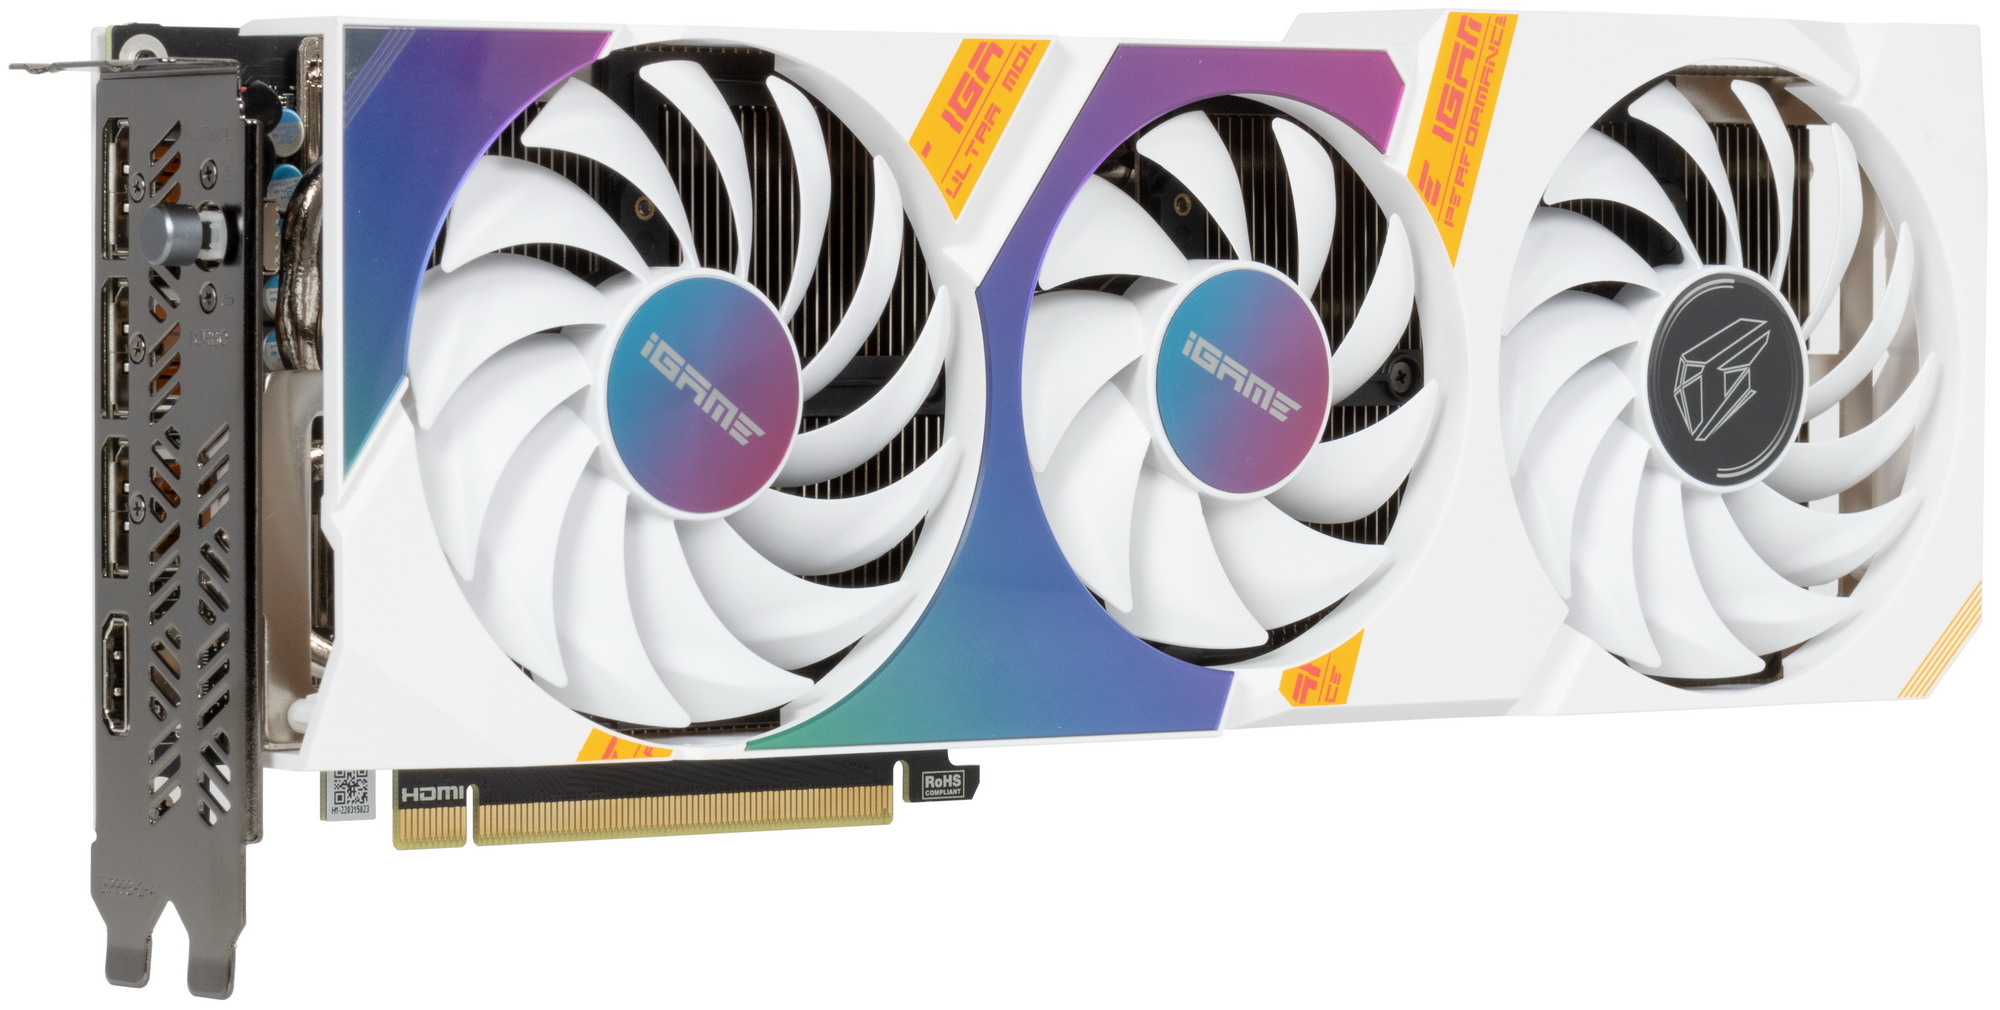 Rtx 3060 colorful ultra w 12g. IGAME GEFORCE RTX 3060 Ultra w OC 12g l-v. RTX 3060 ультра. RTX 3060 colorful IGAME. 3060 Ultra w.